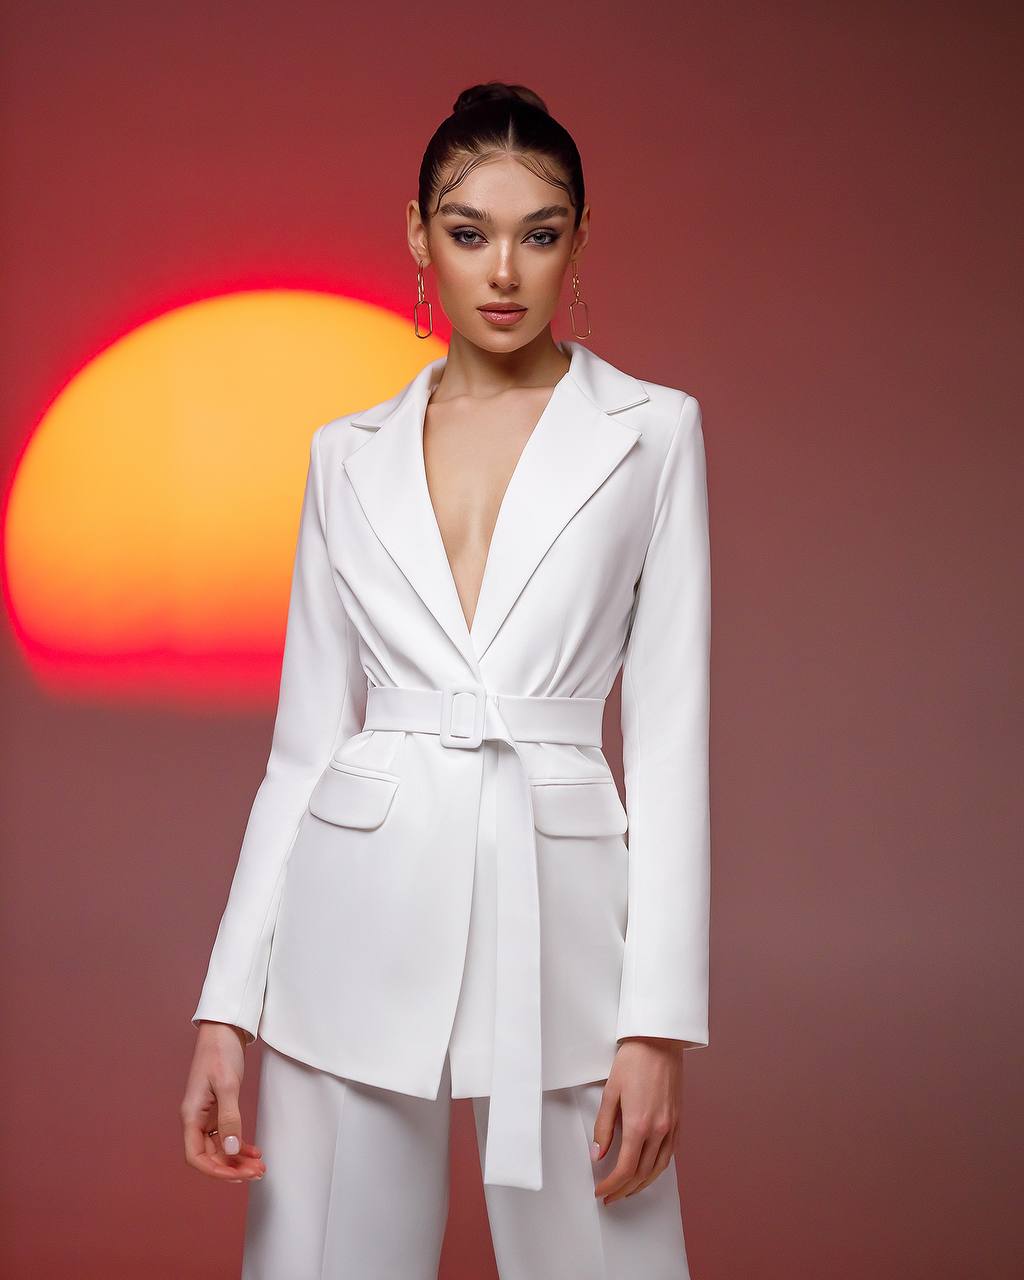 a woman in a white suit standing in front of a sunset